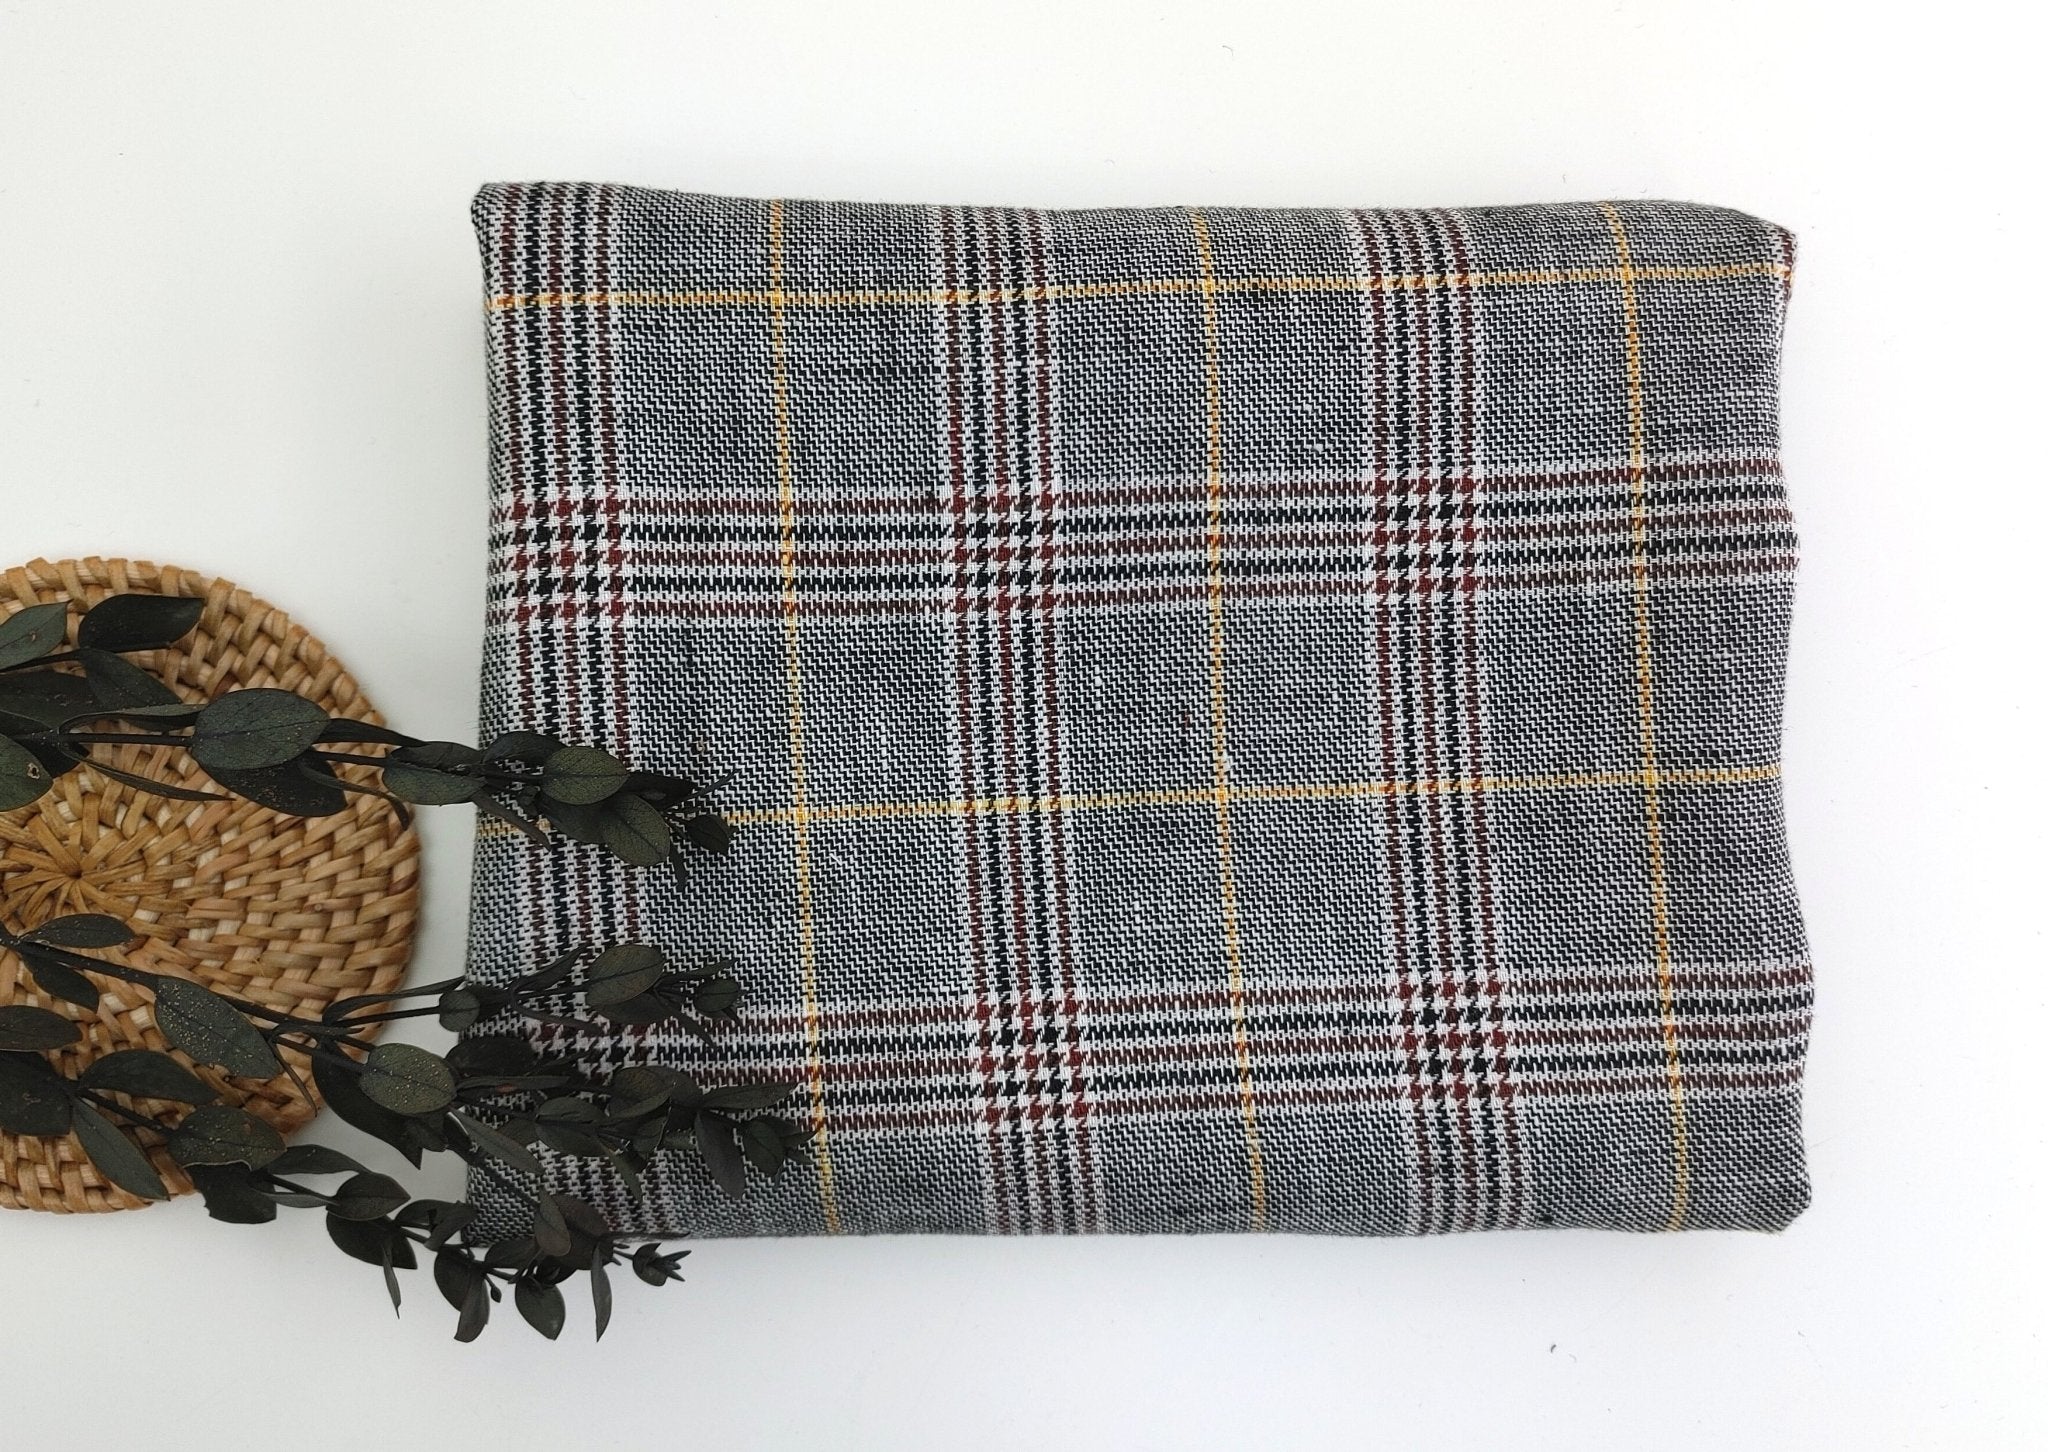 100% Linen Glen Plaid with Yellow Windowpane – White, Black, and Brown Harmony 6715 - The Linen Lab - Yellow